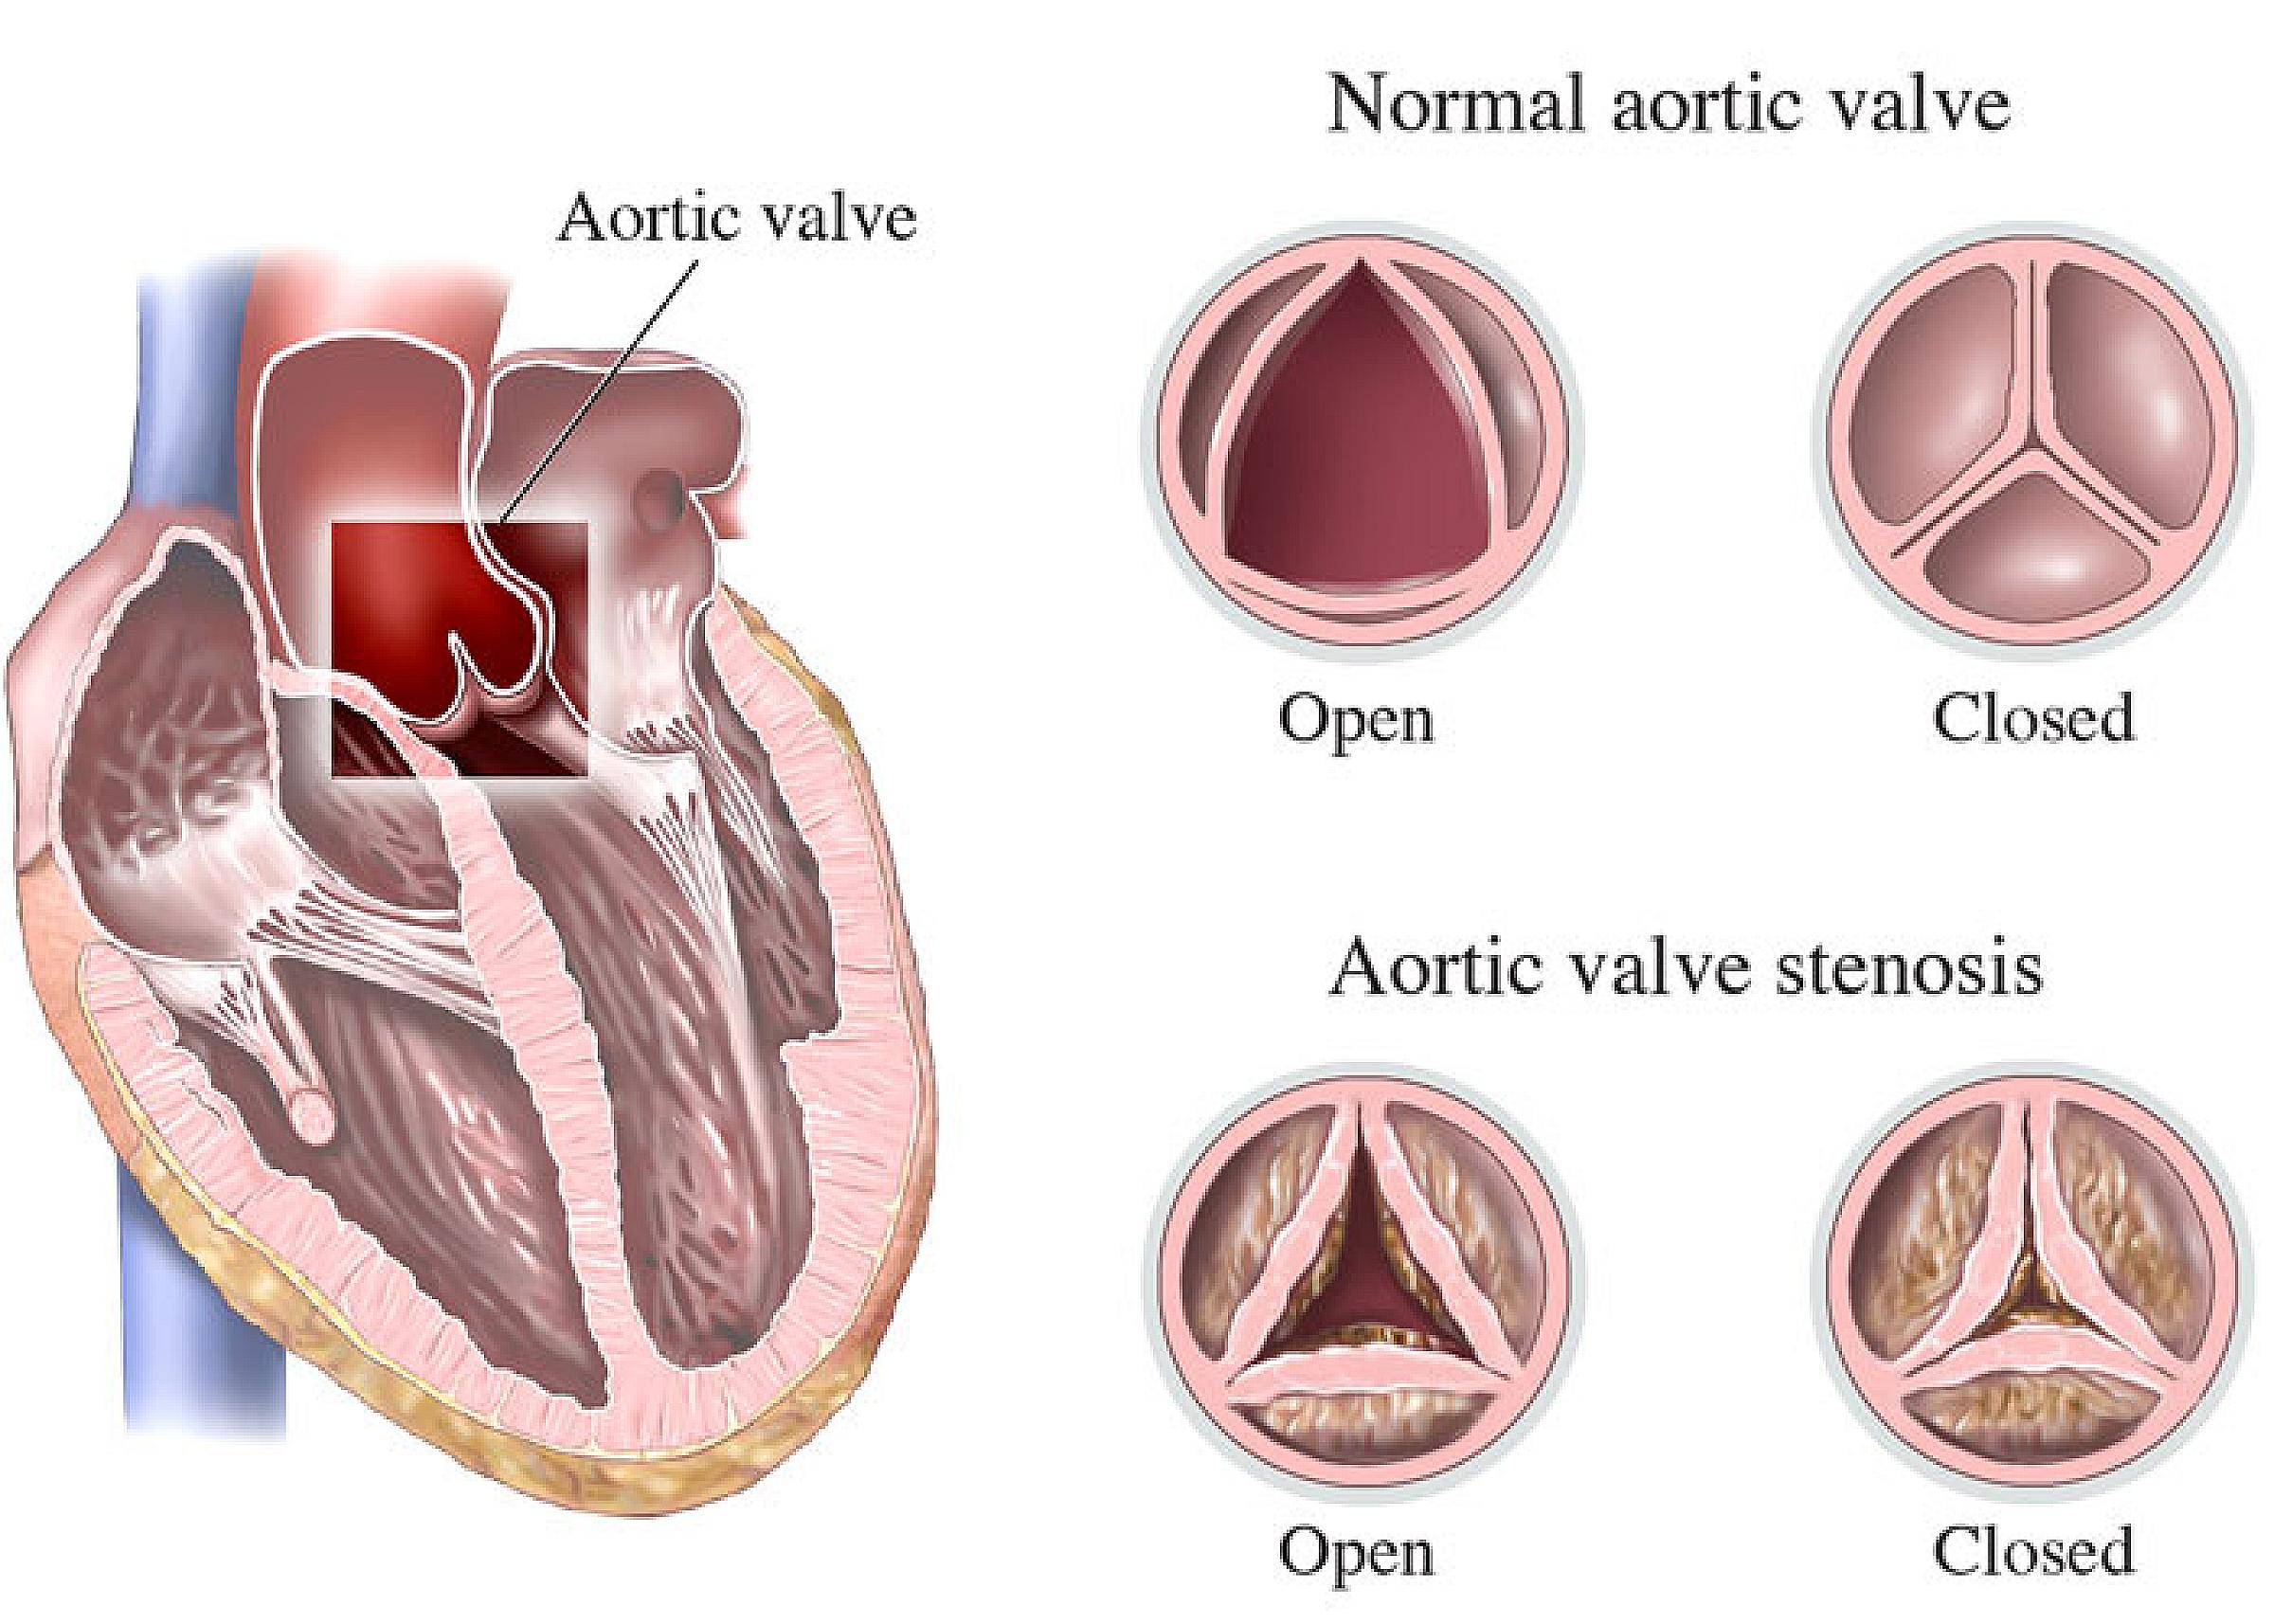 Aortic valve illustration and aortic valve stenosis